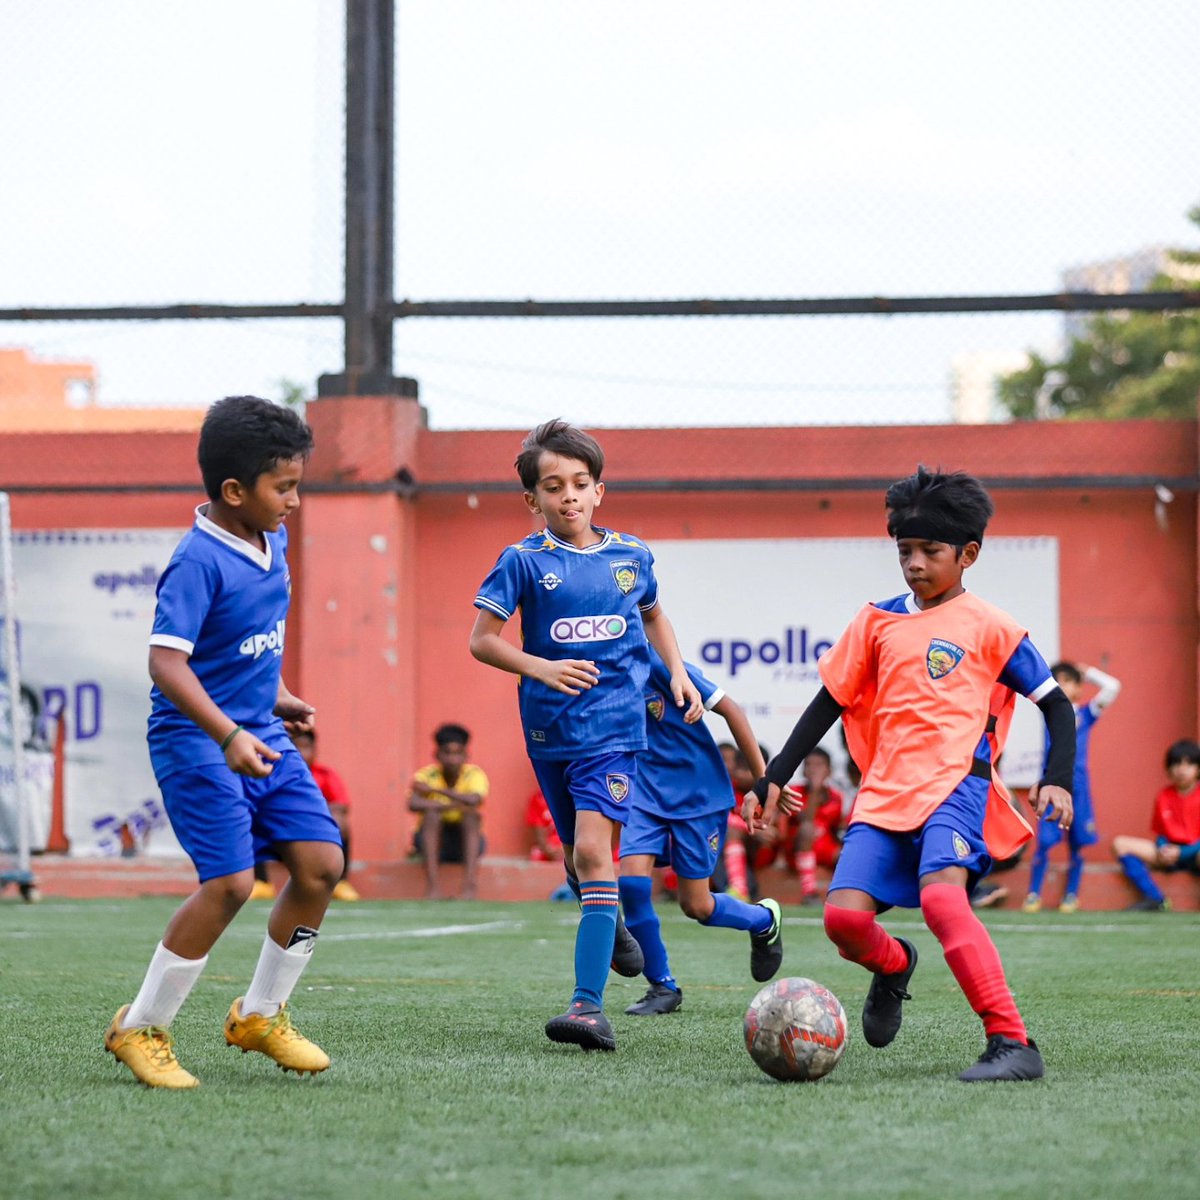 We invited the kids that are part of our soccer school programme in Chennai for an enjoyable session of football, to celebrate grassroots day the Chennaiyin way! ⚽💙 #ChennaiyinFCYouth #ChennaiyinFC #CFCSoccerSchools #AllInForChennaiyin #GrassrootsDay #AFCGrassrootsDay #AFC